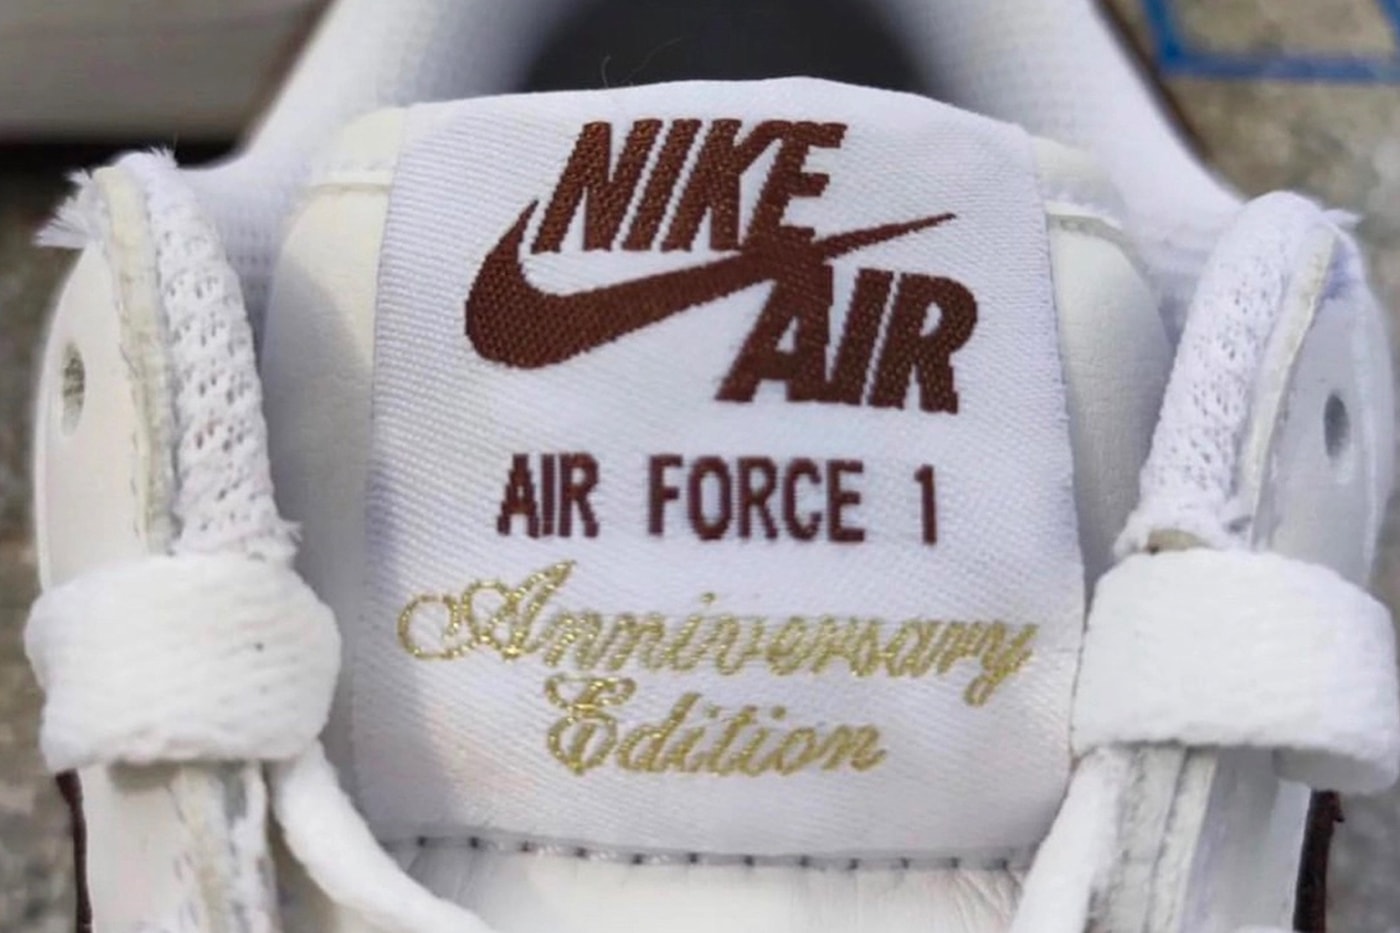 Nike Air Force 1 Low 'Anniversary Edition' Resale Info: How to Buy